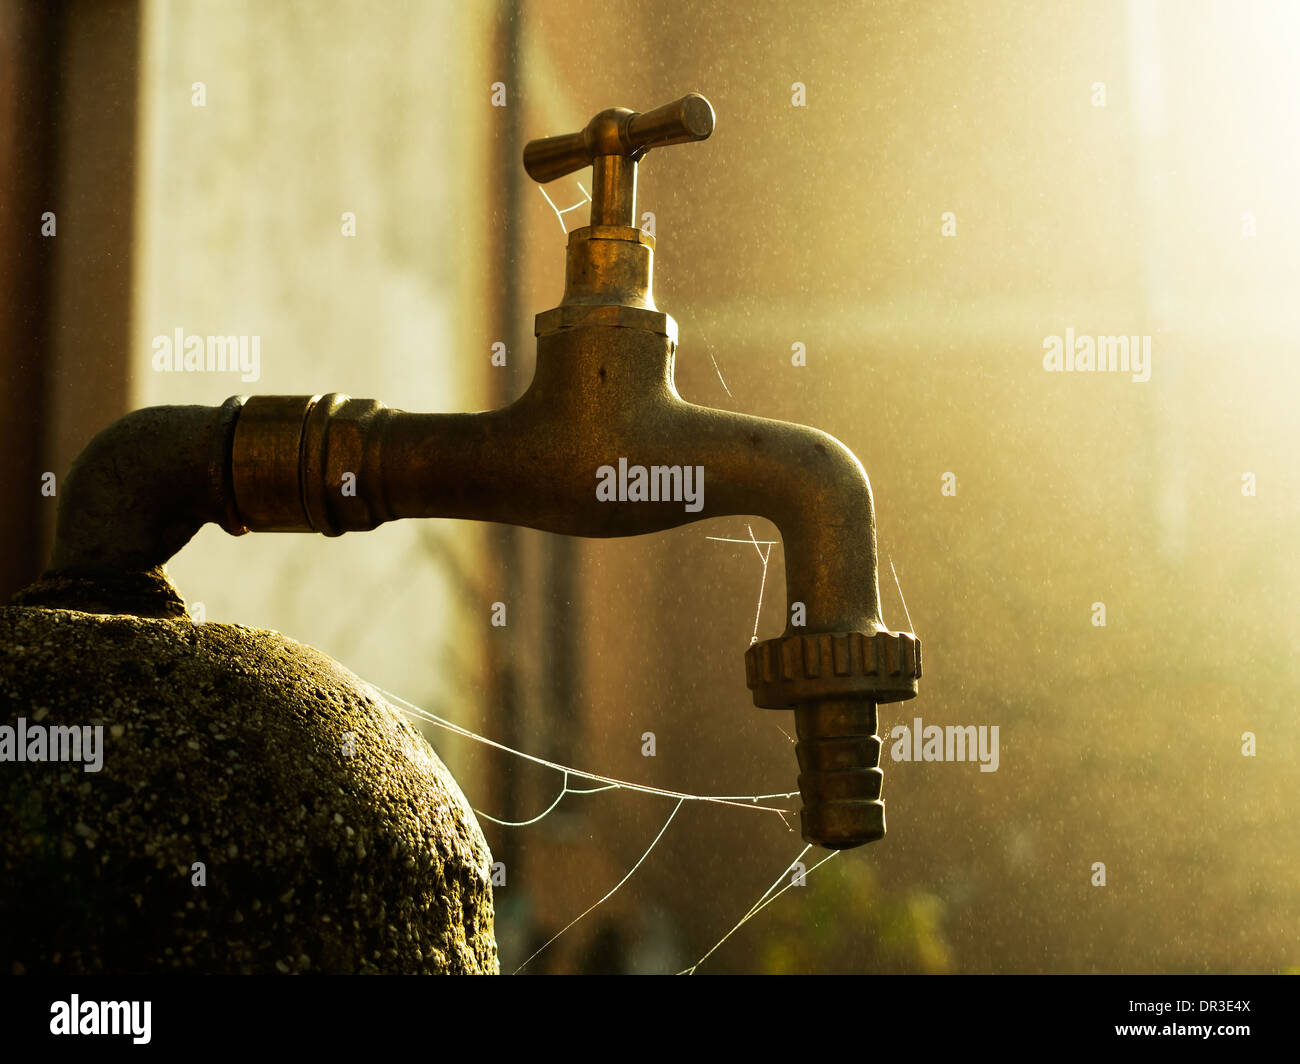 Beautiful January morning - old tap with cobwebs. Rustic, rural idyll. Stock Photo